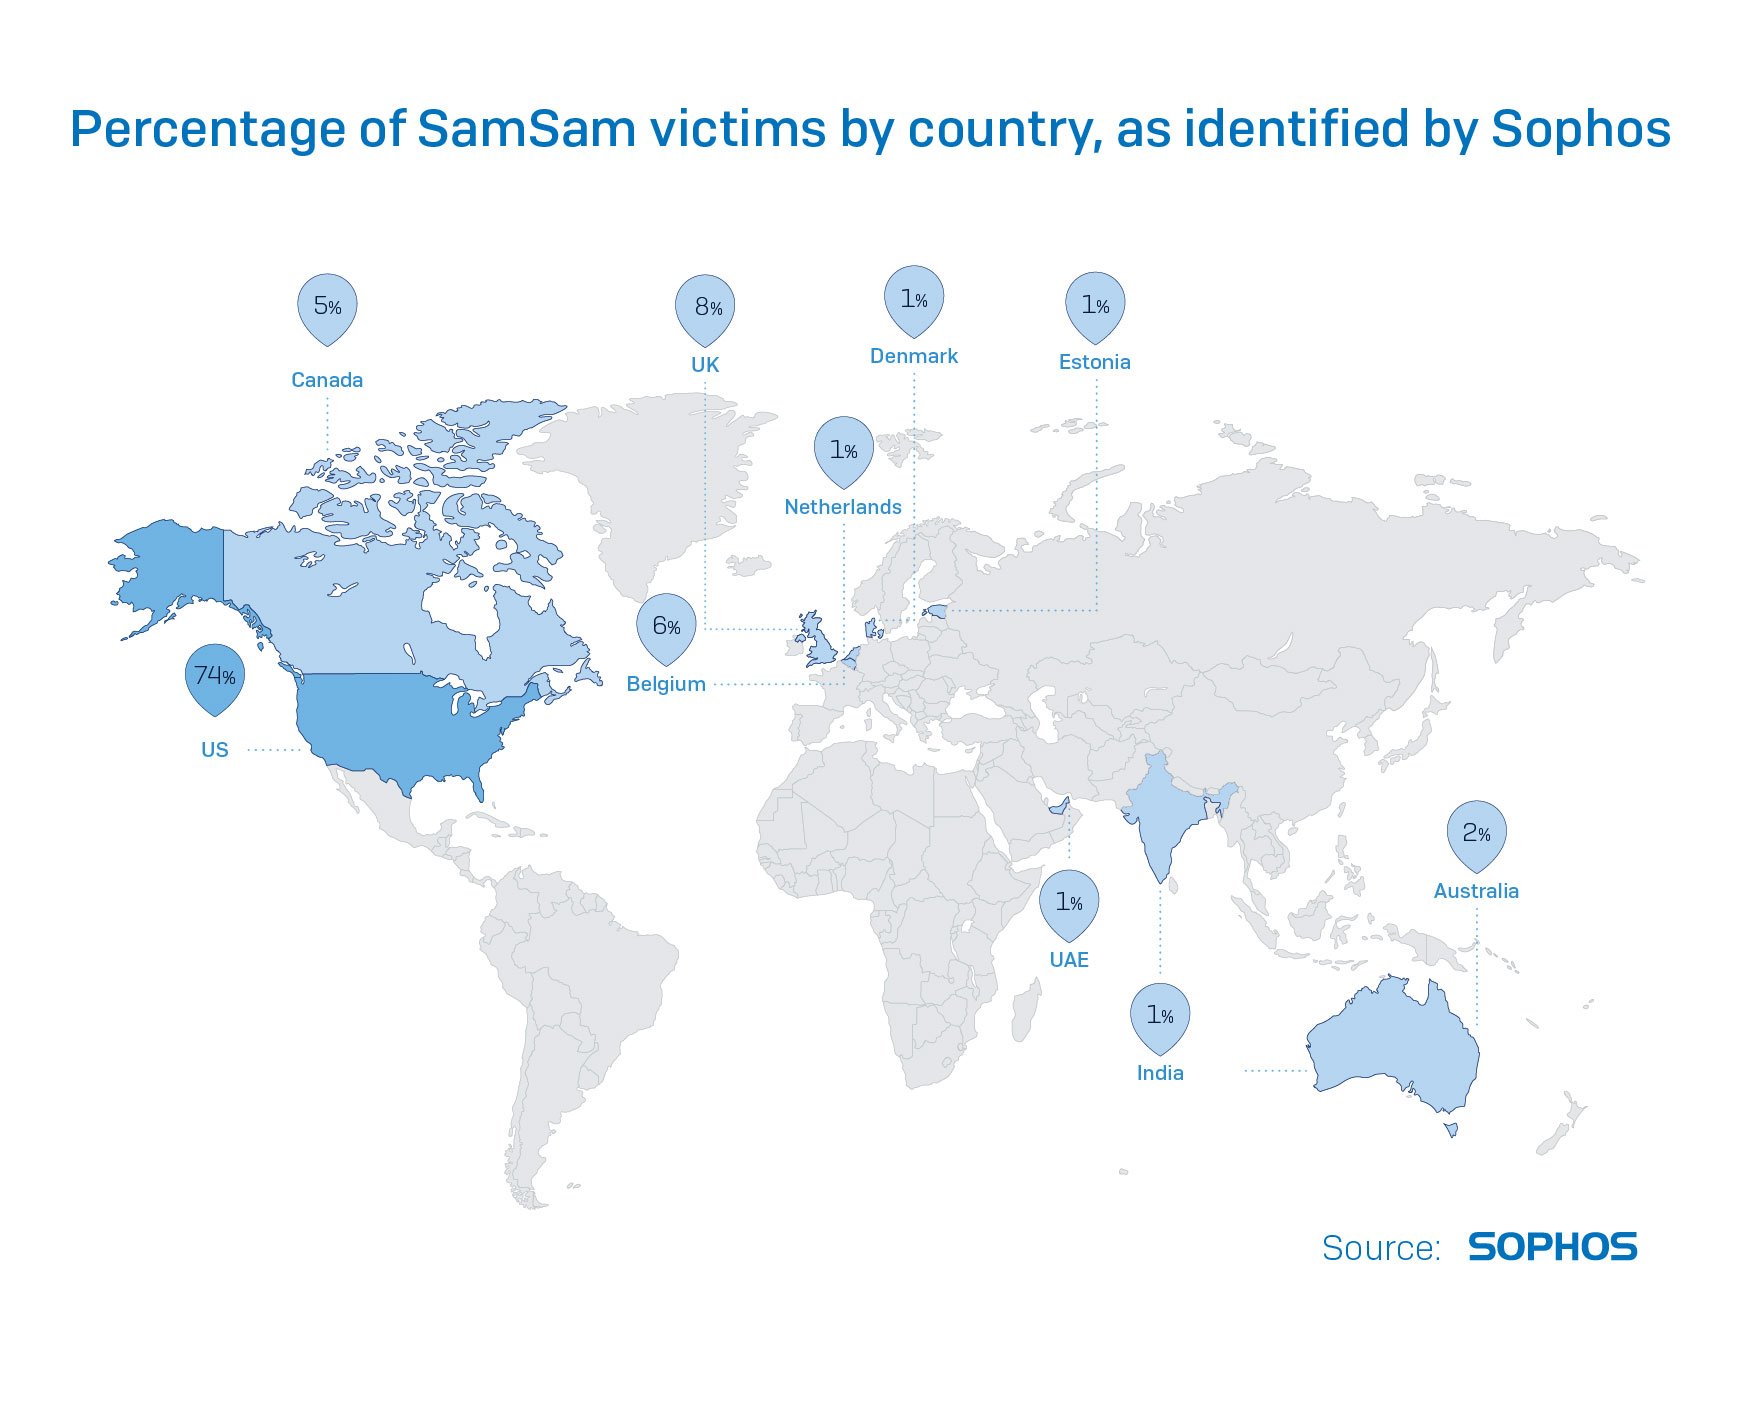 Sophos Source Percentage of SamSam victims by country